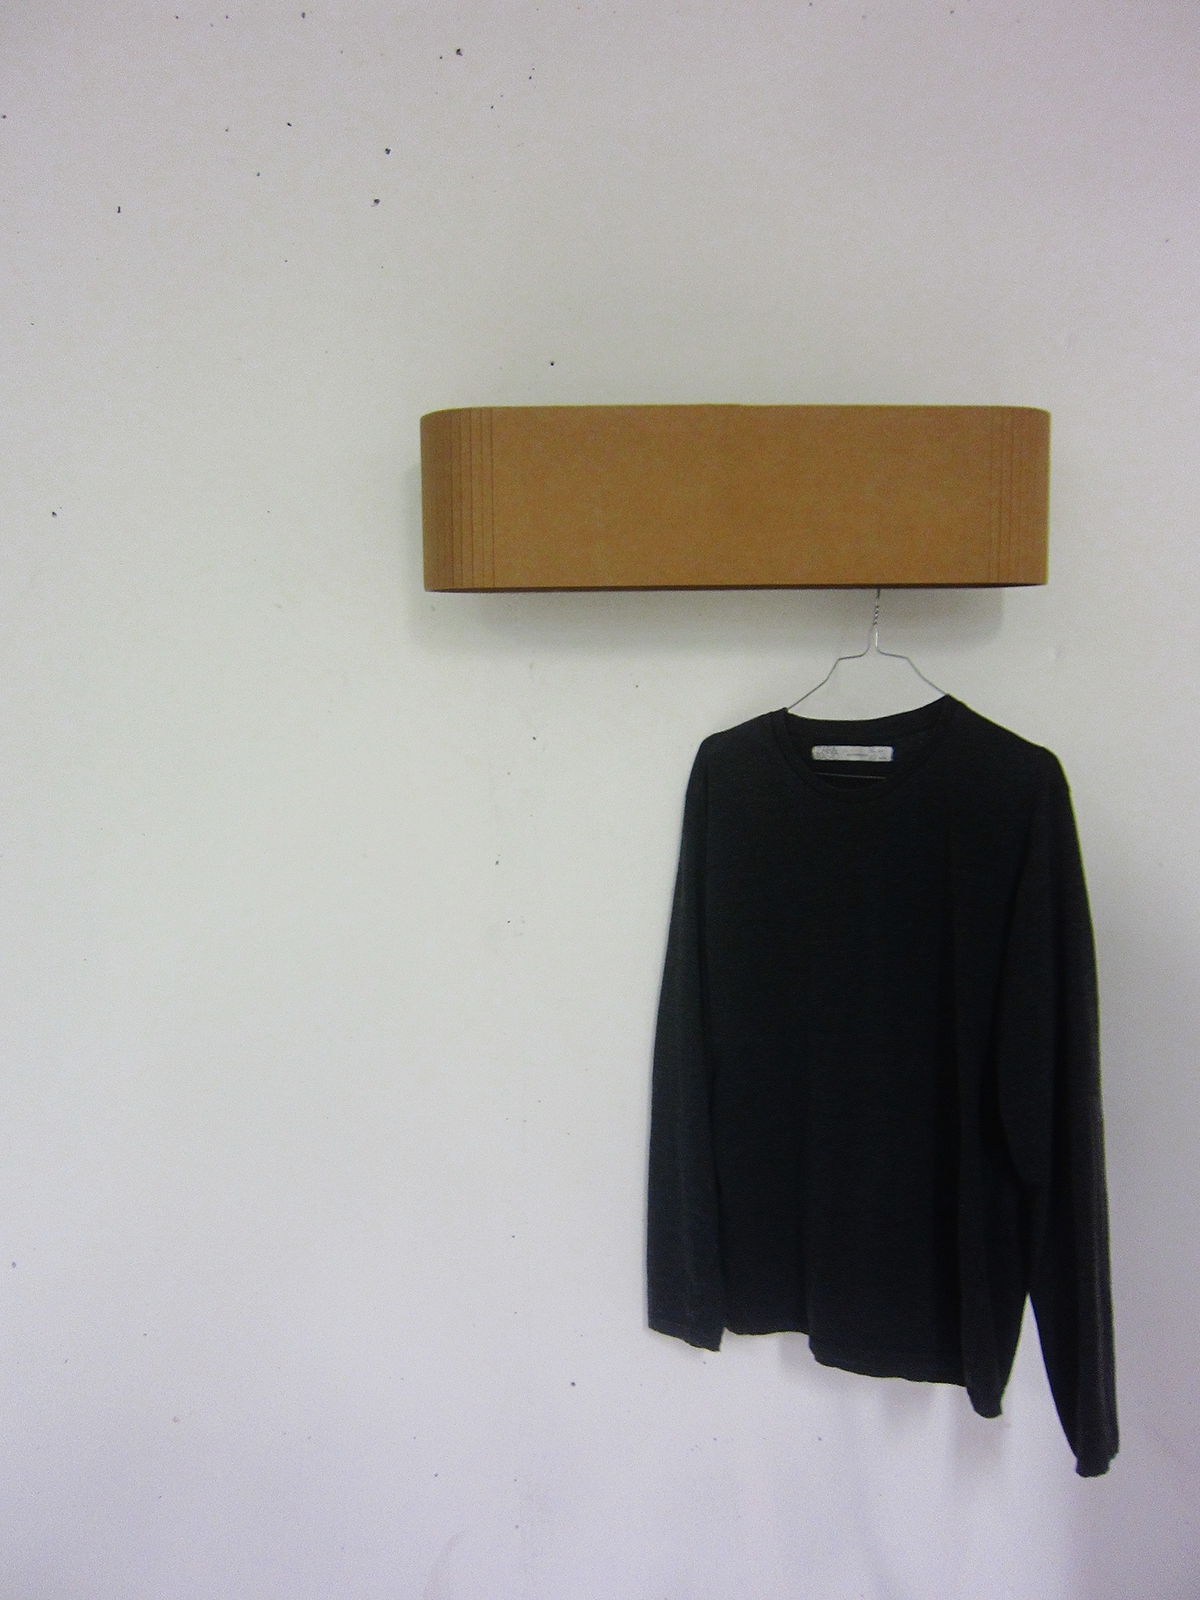 hanger  clothes  dryer  wall mounted  inexpensive  dry  air  tumble dryer